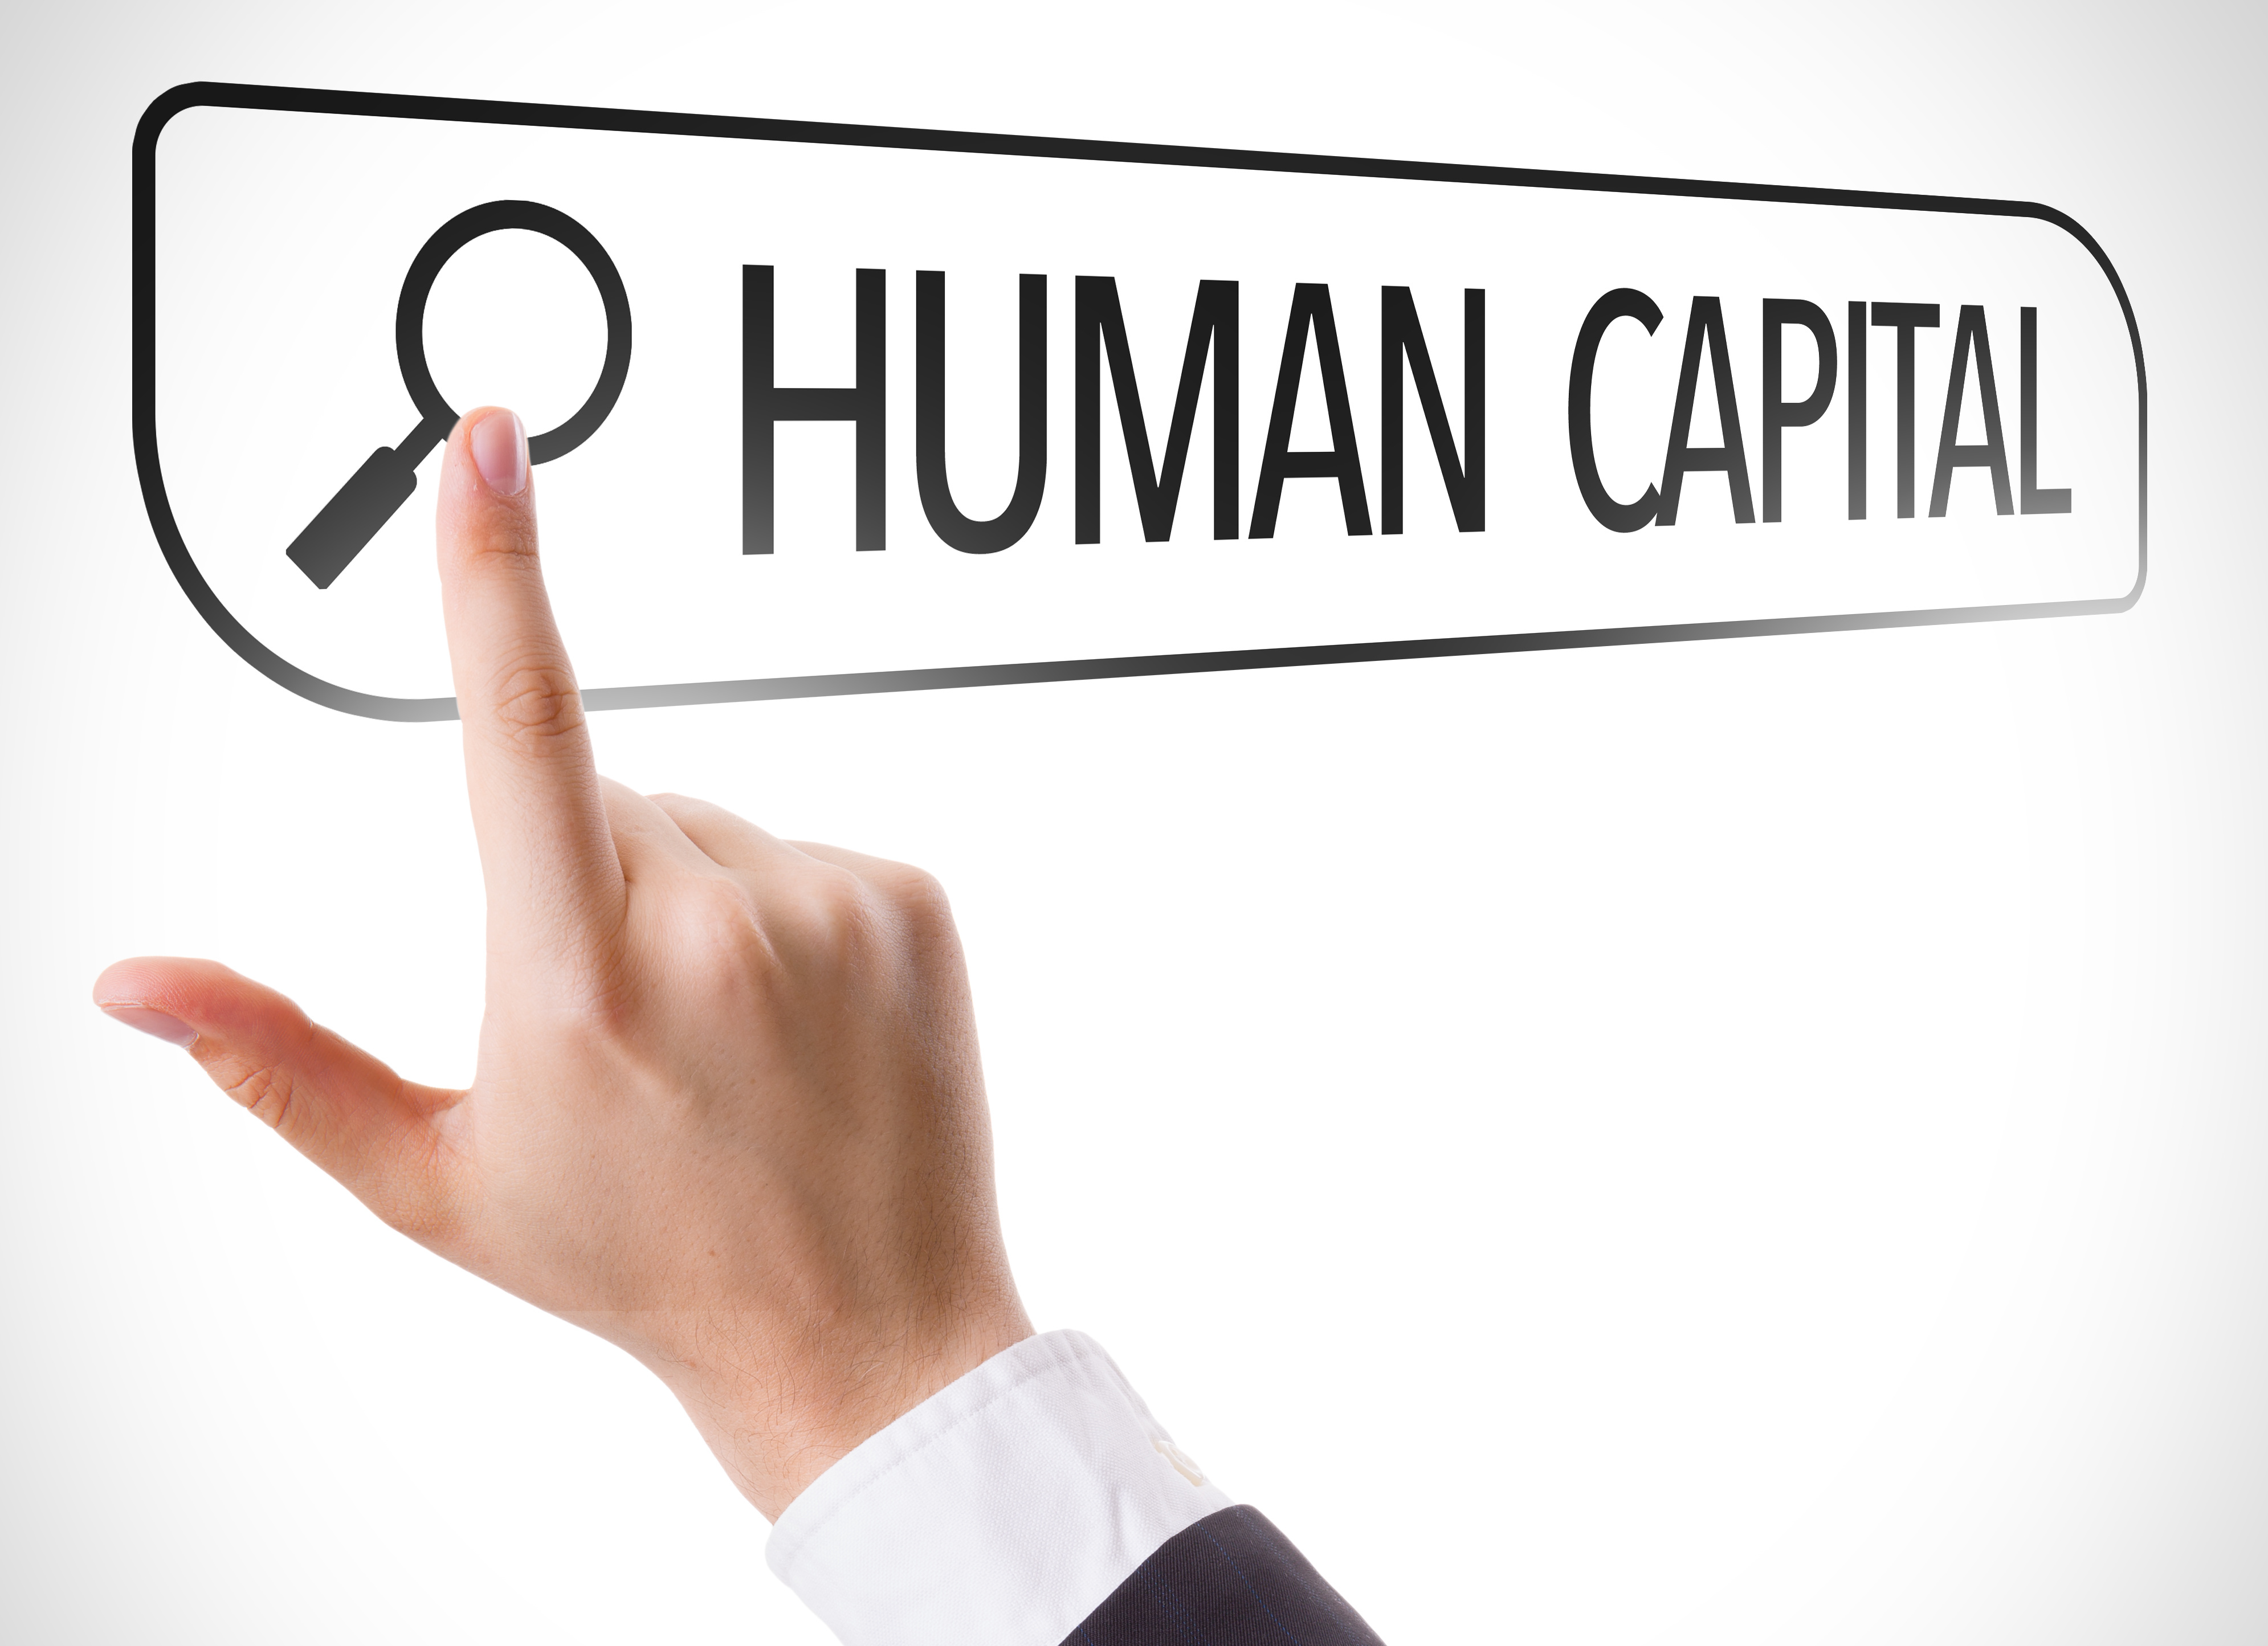 What is Human Capital Management? Human Capital